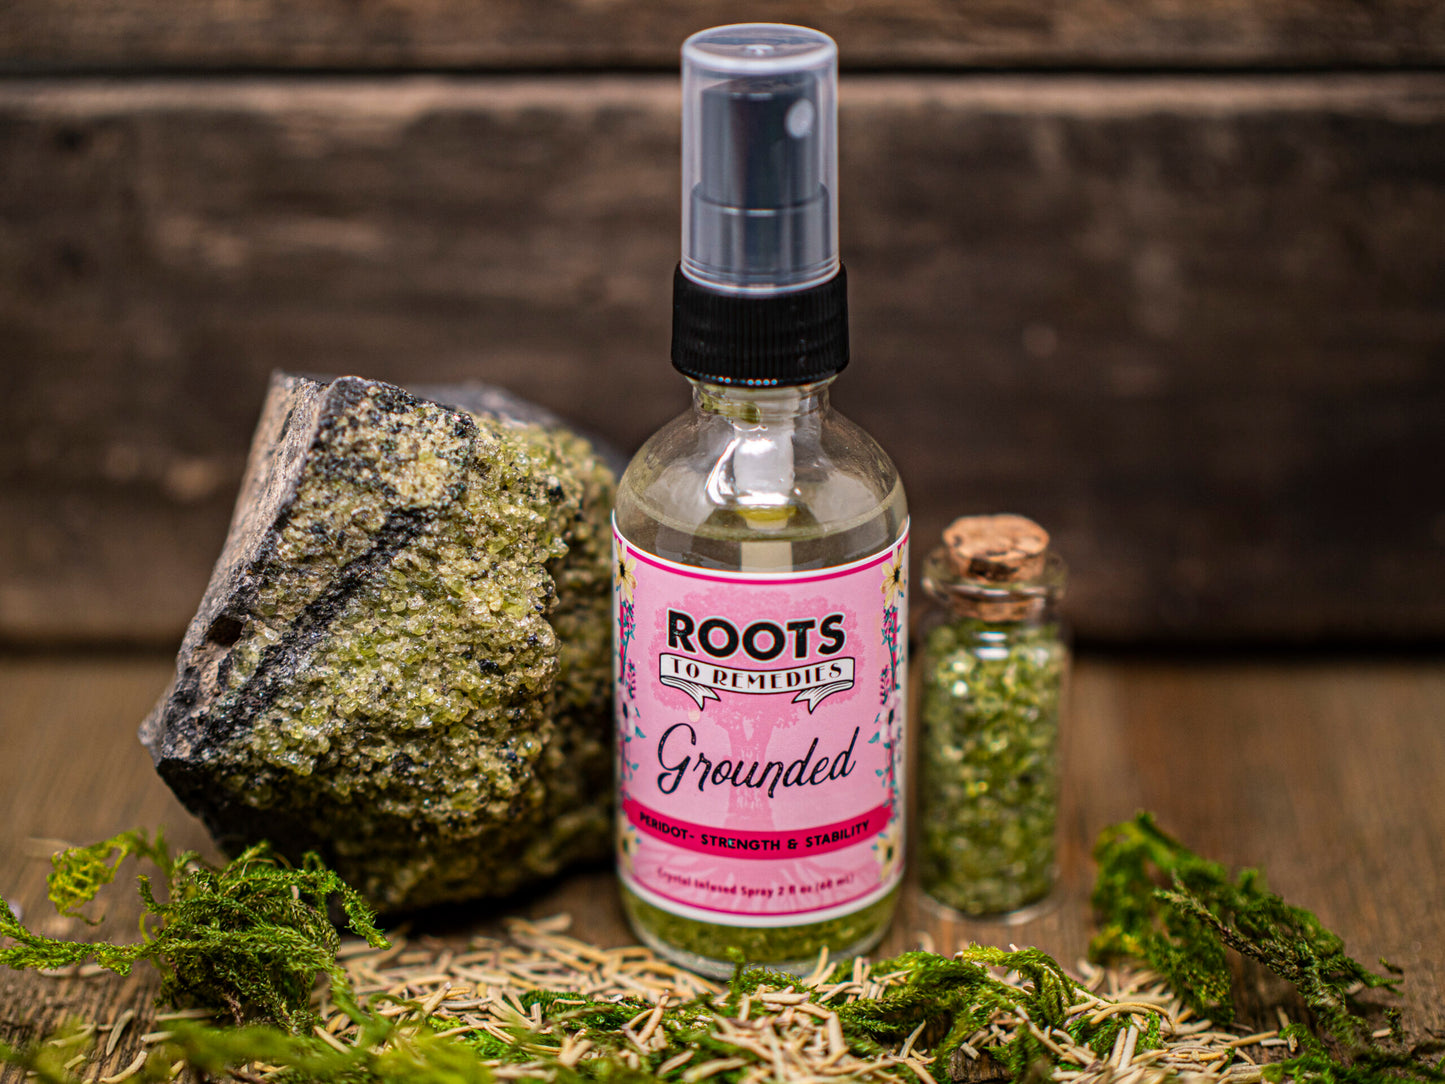 “GROUNDED” CRYSTAL AND HERBAL INFUSED SPRAY